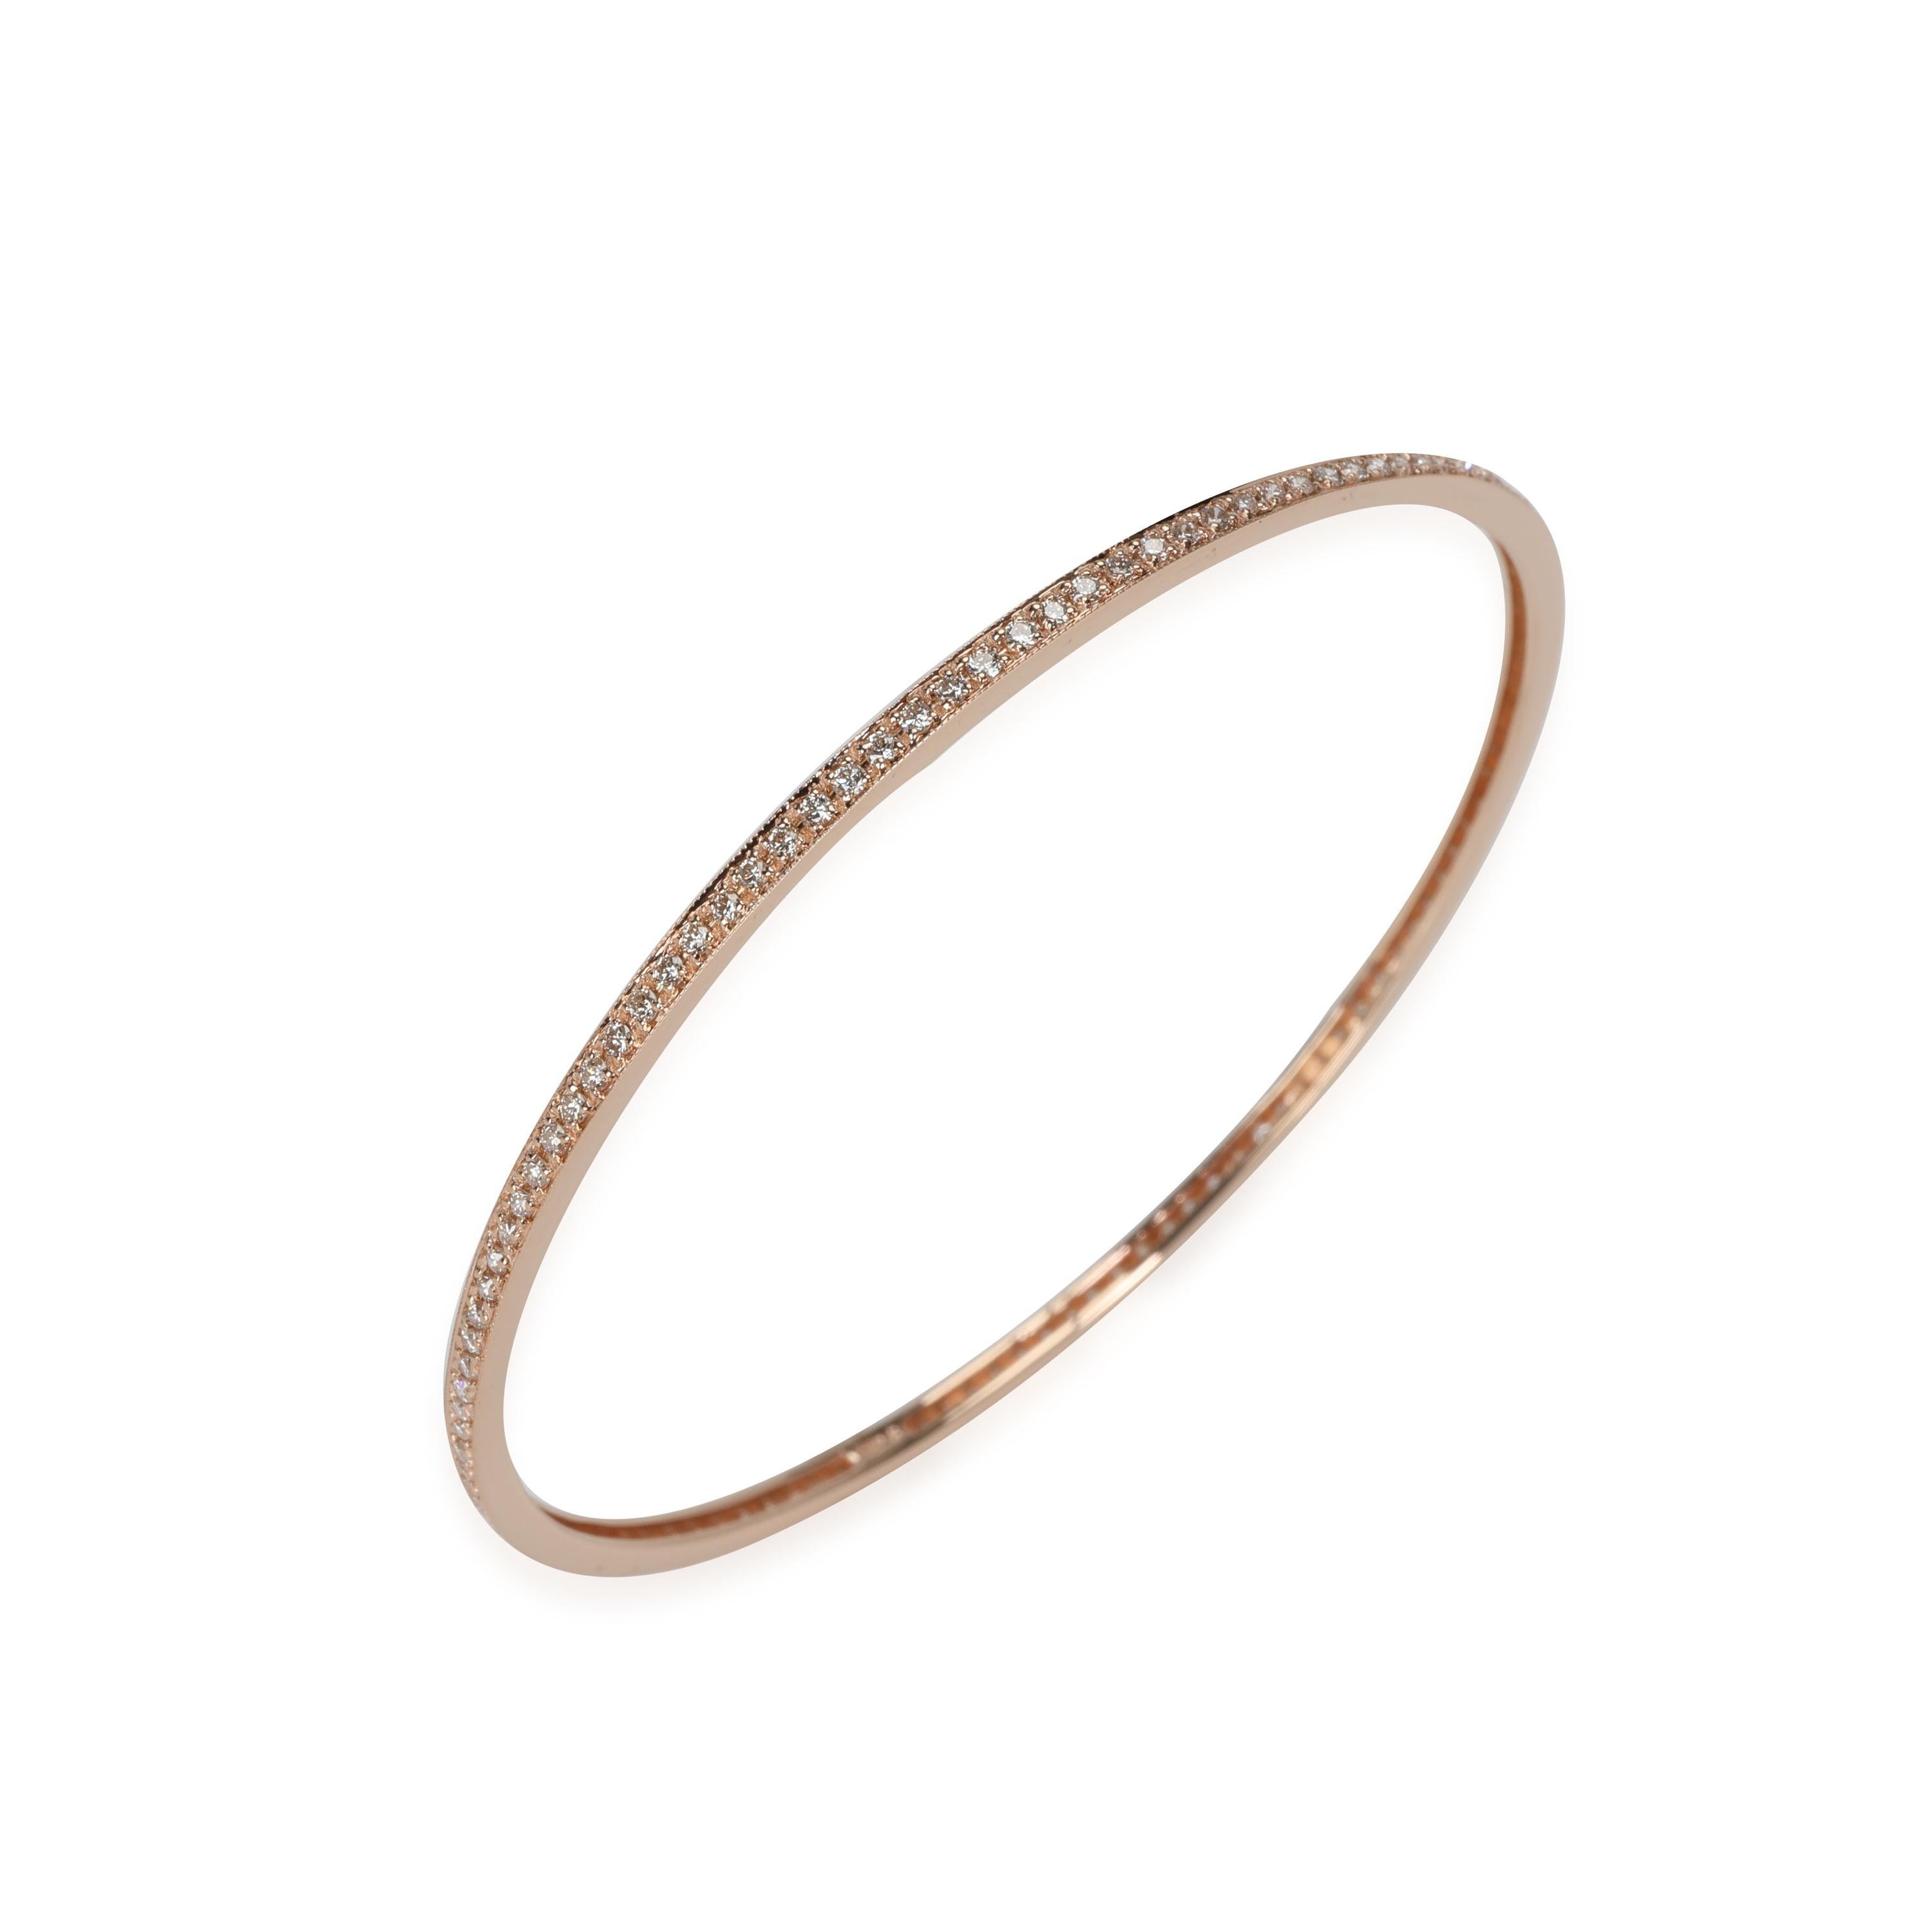 Diamond Bangle in 18k Rose Gold 1.75 CTW In Excellent Condition For Sale In New York, NY